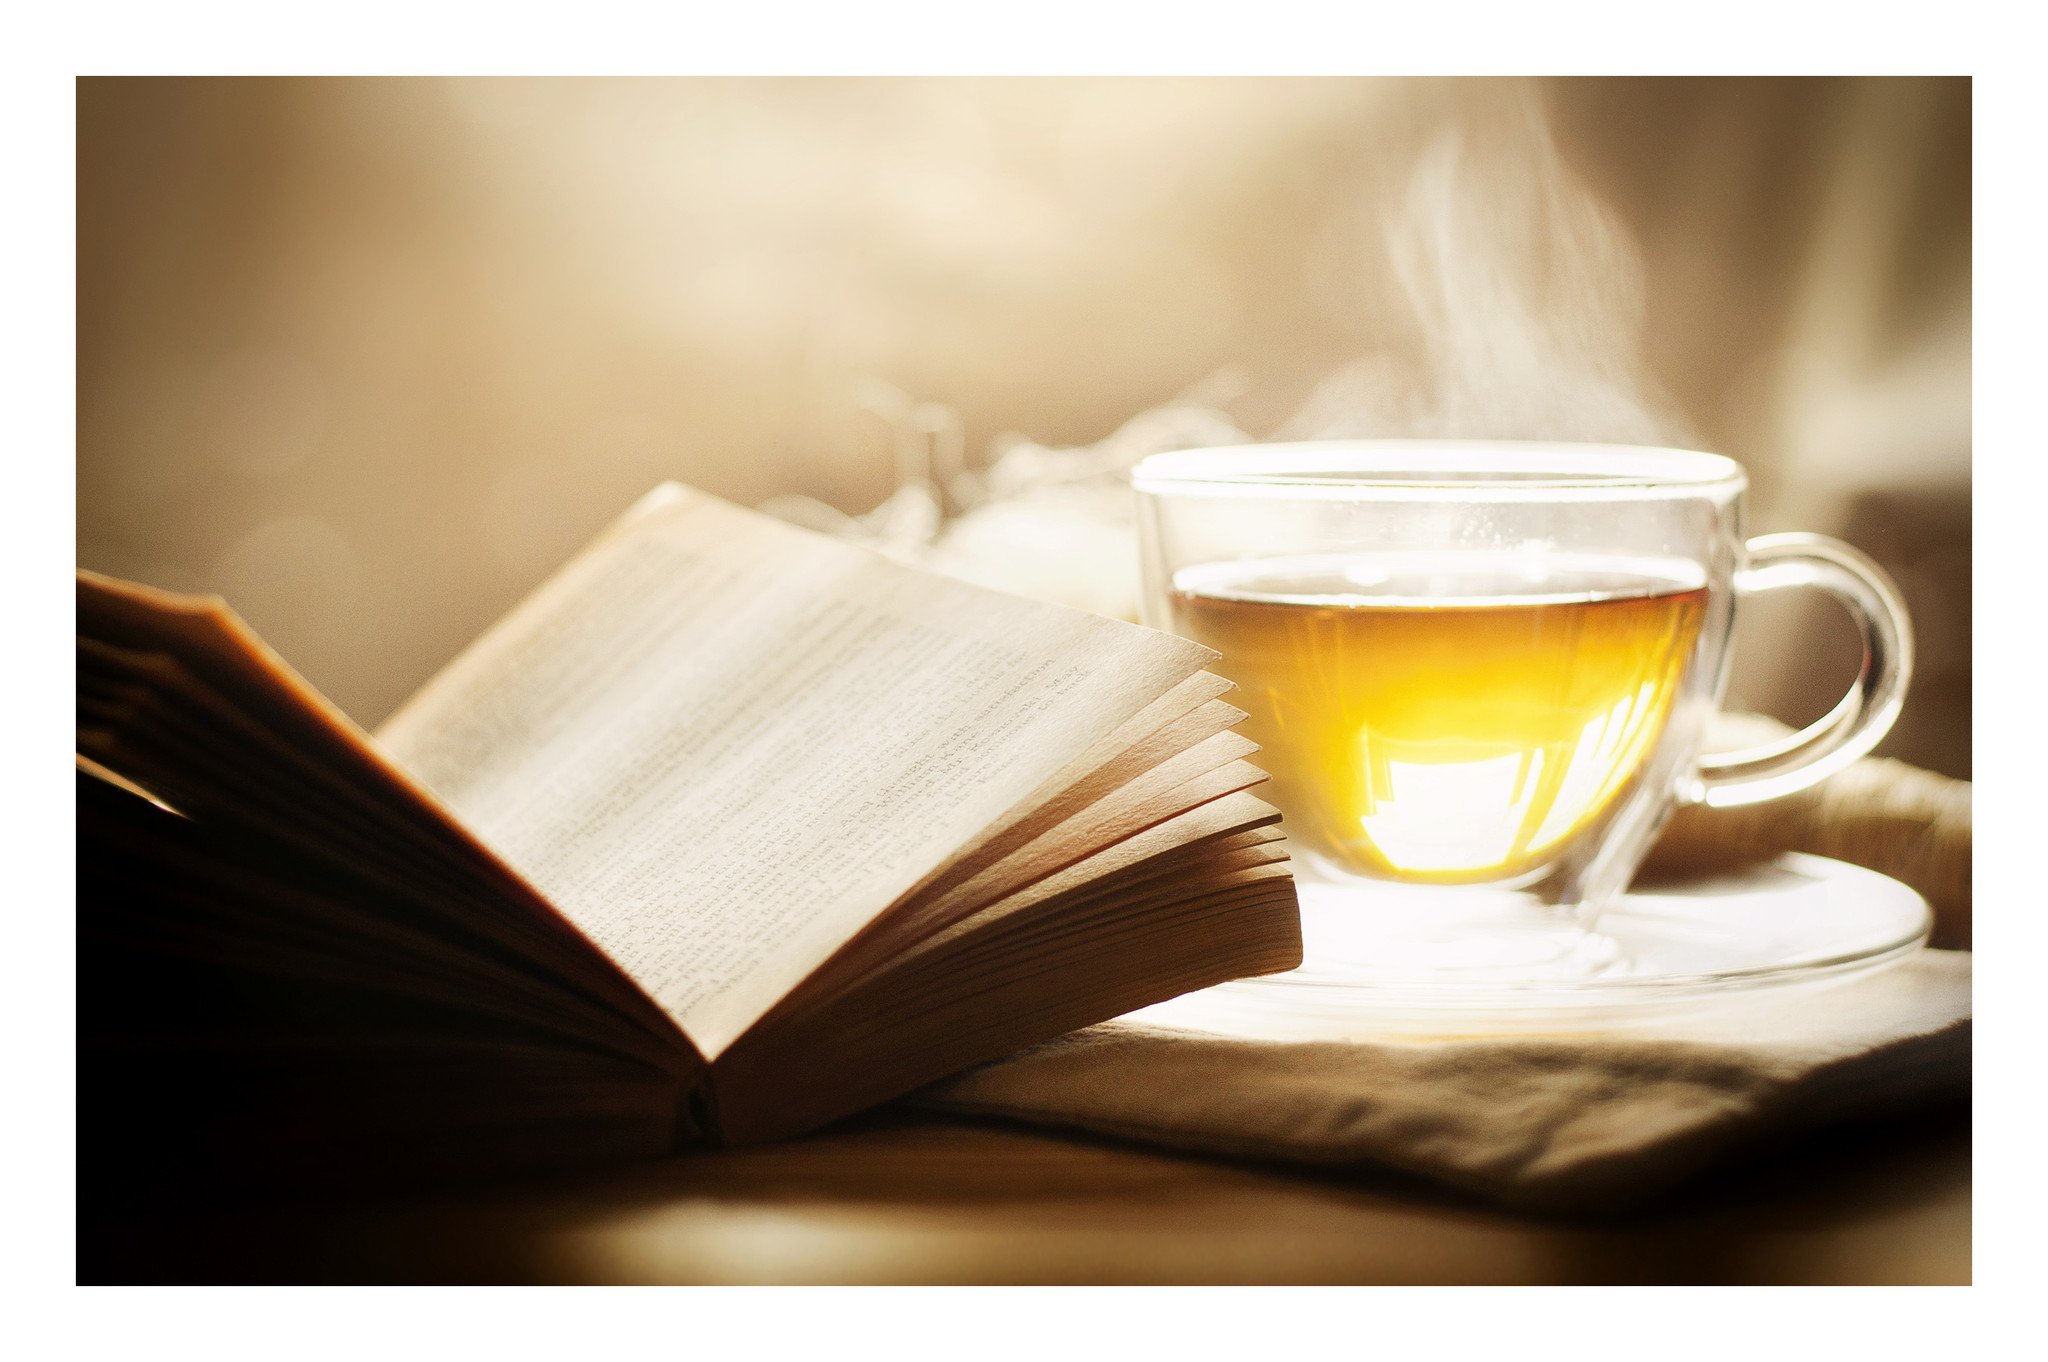 Who doesn't want to curl up with a book and a nice comfy drink?